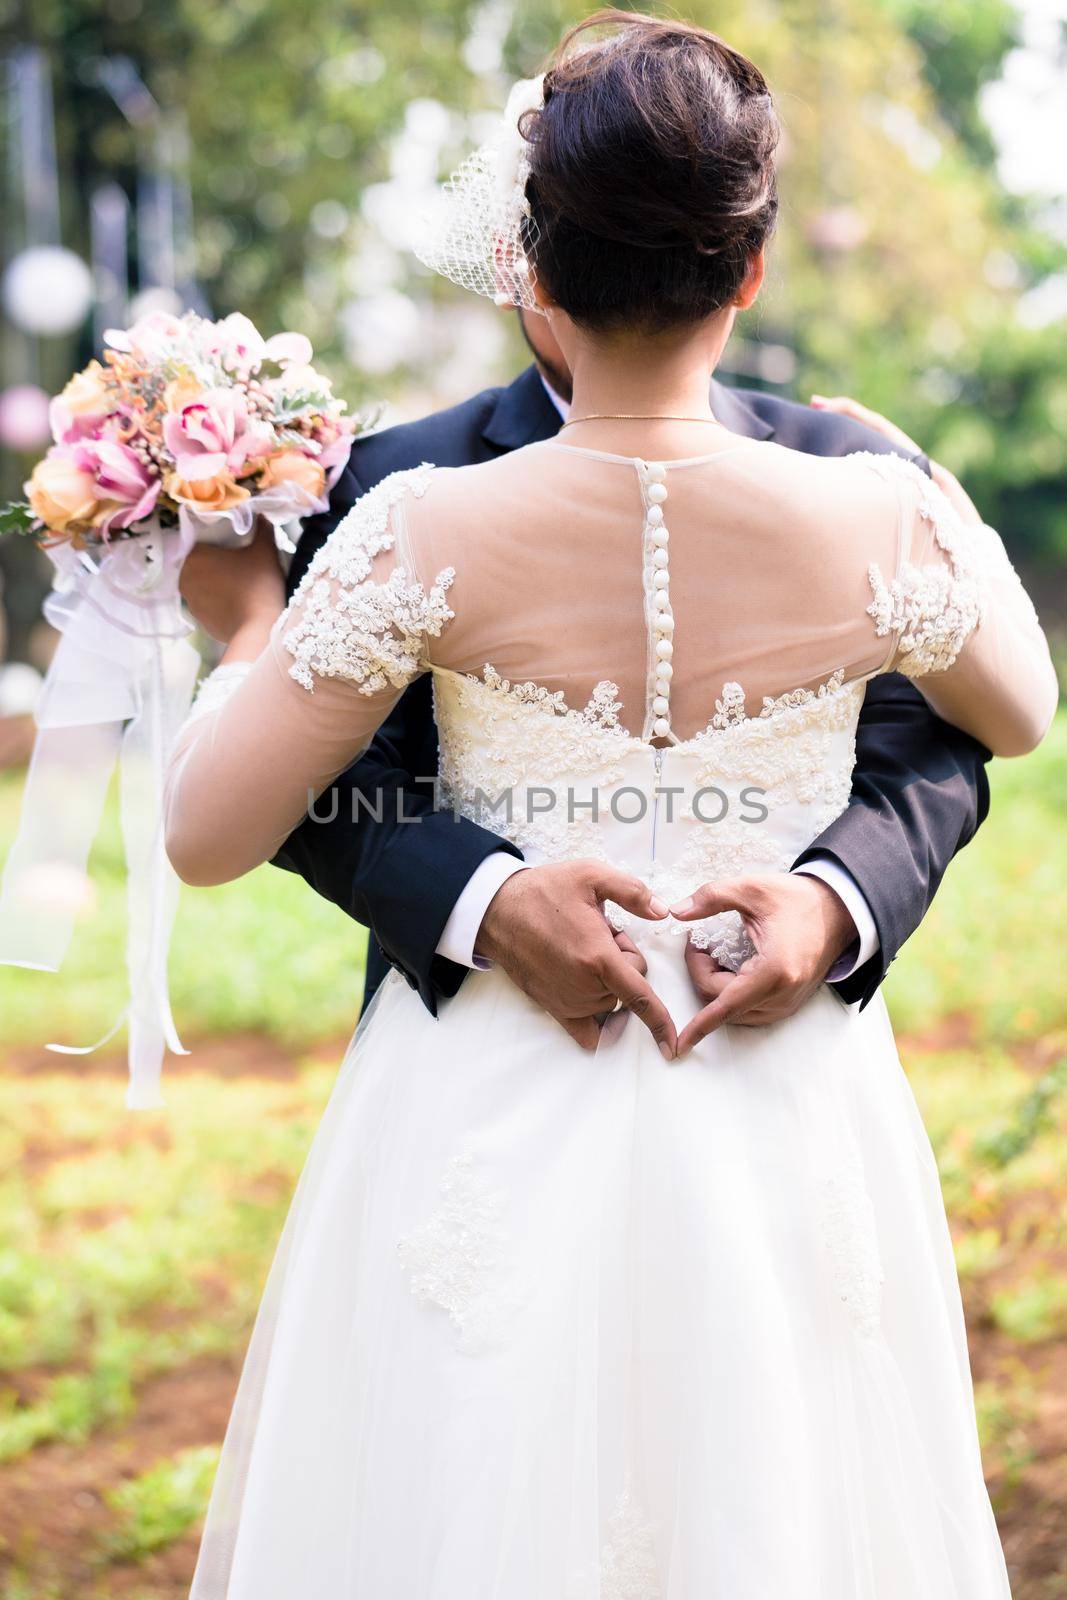 Bride and Bridegroom hugging each other at wedding ceremony